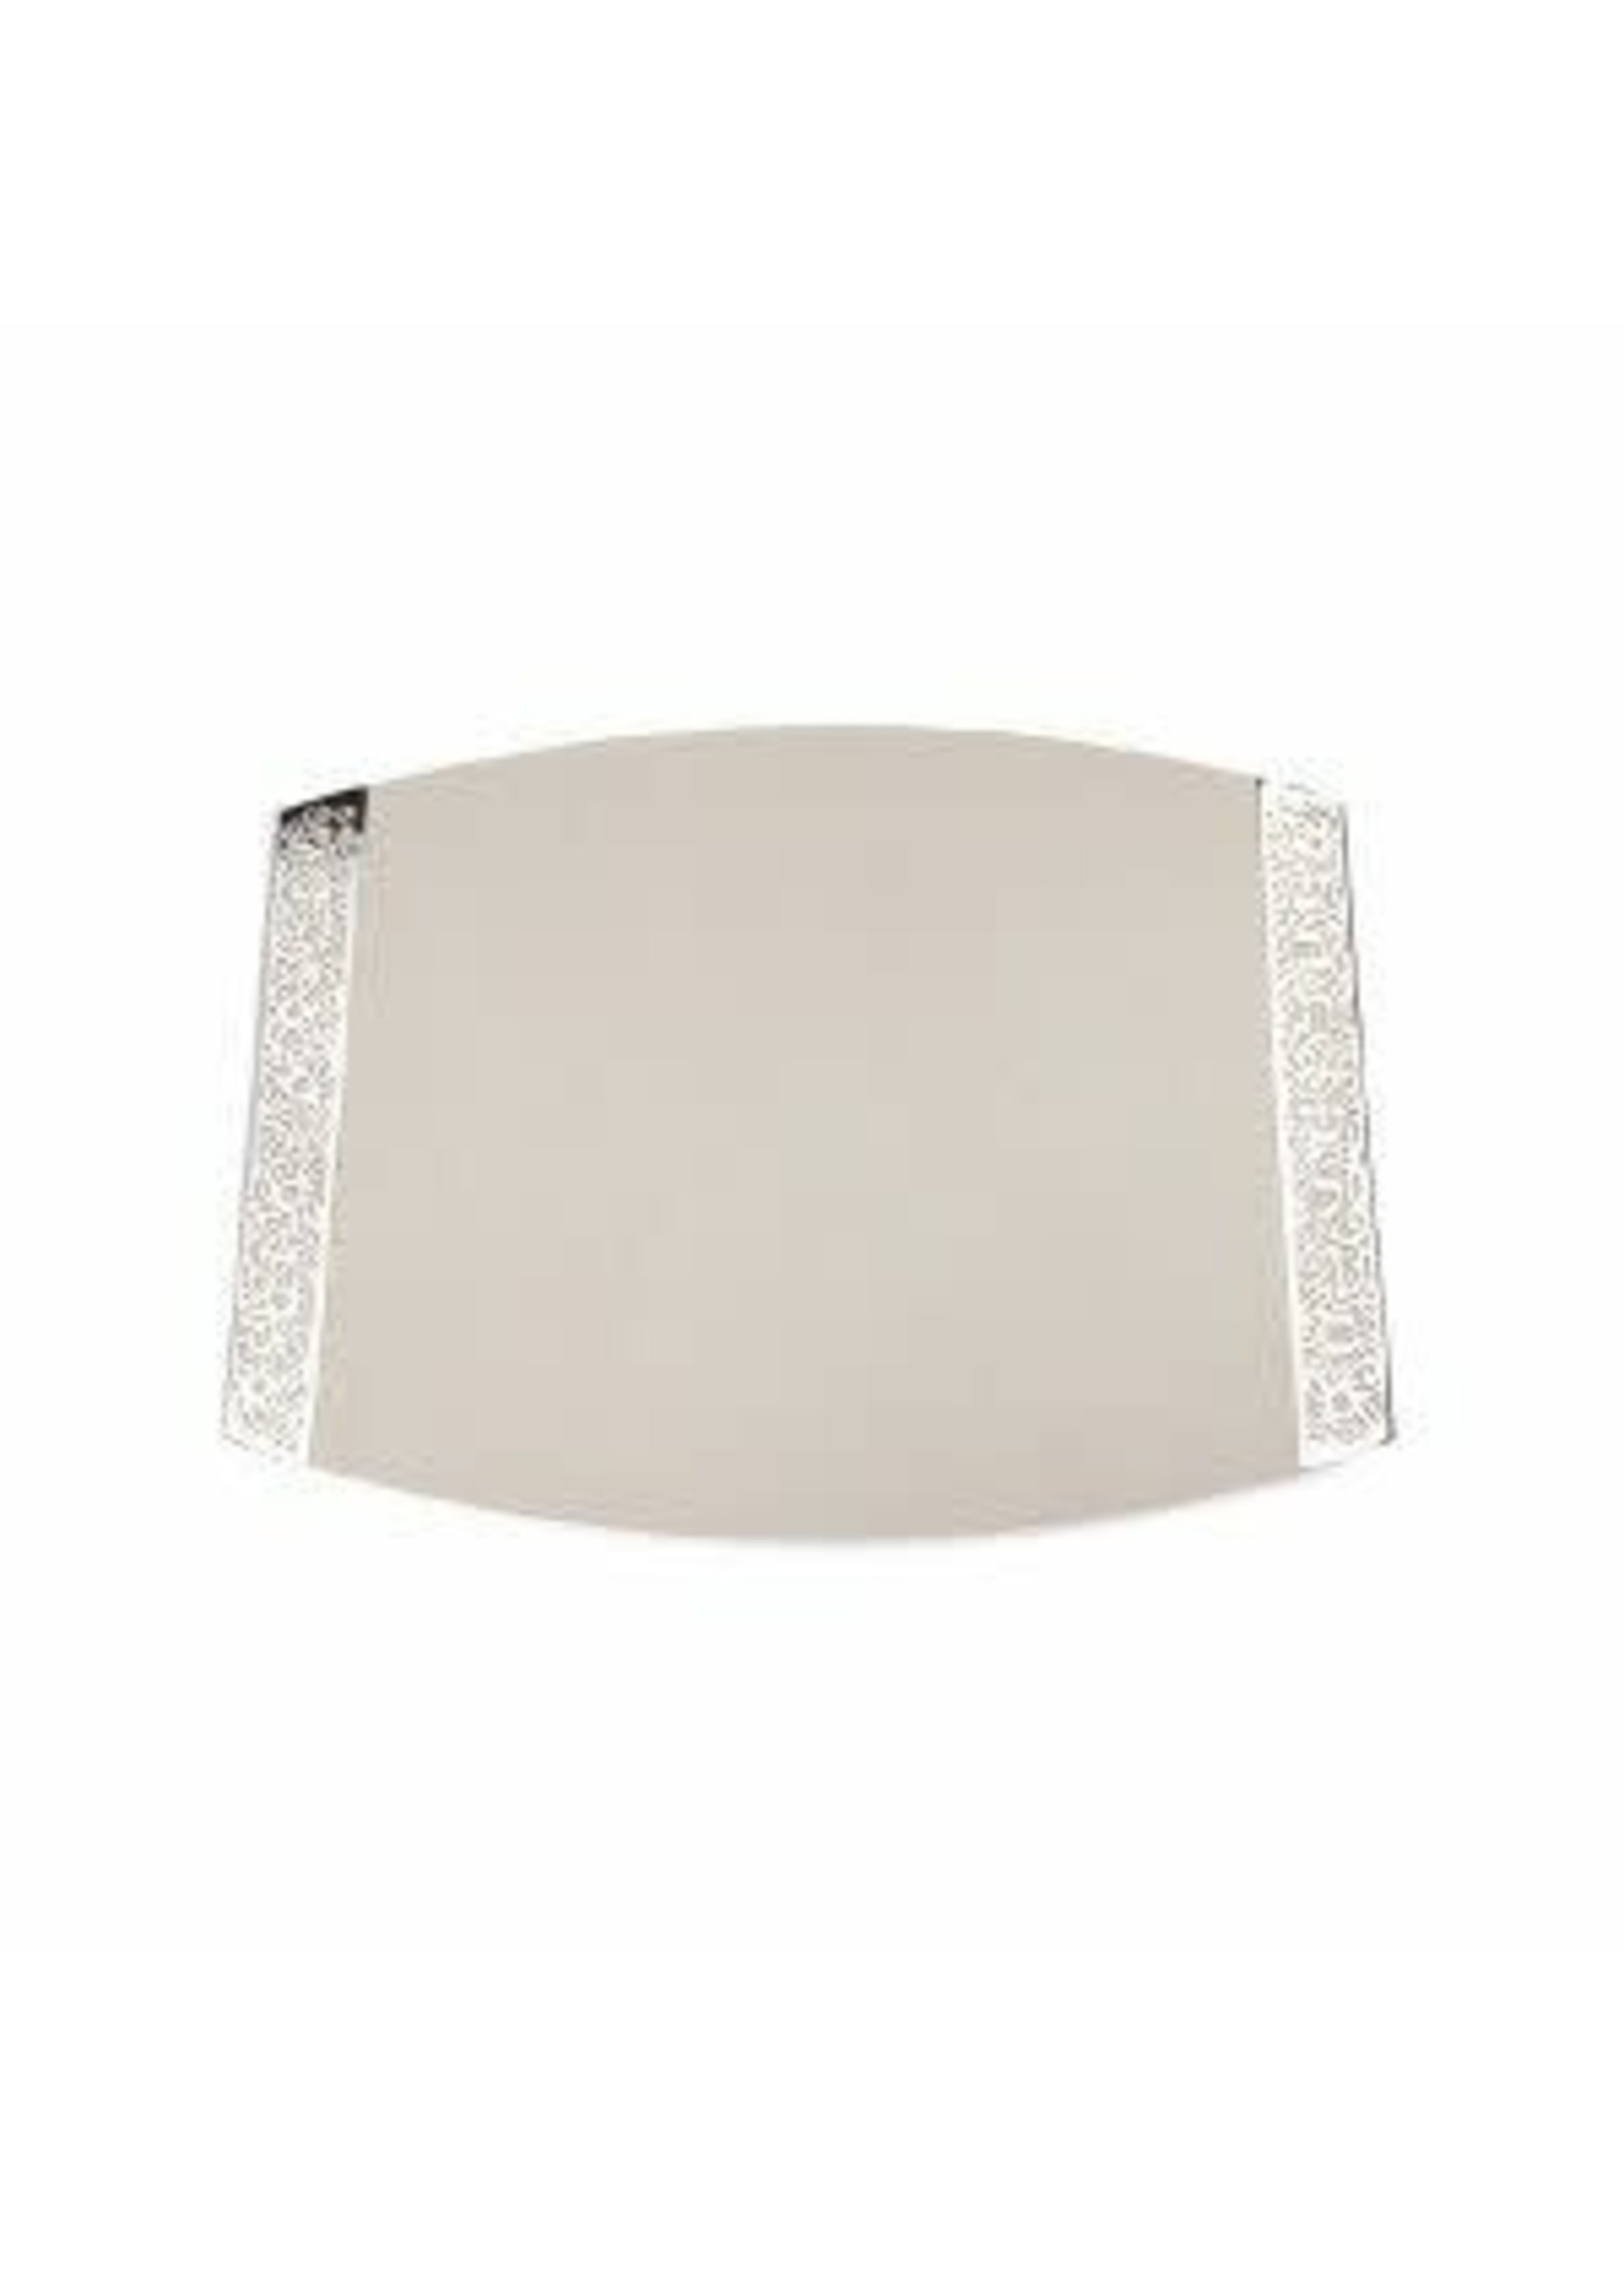 CHALLAH BOARD PORCELAIN WITH METAL LACE